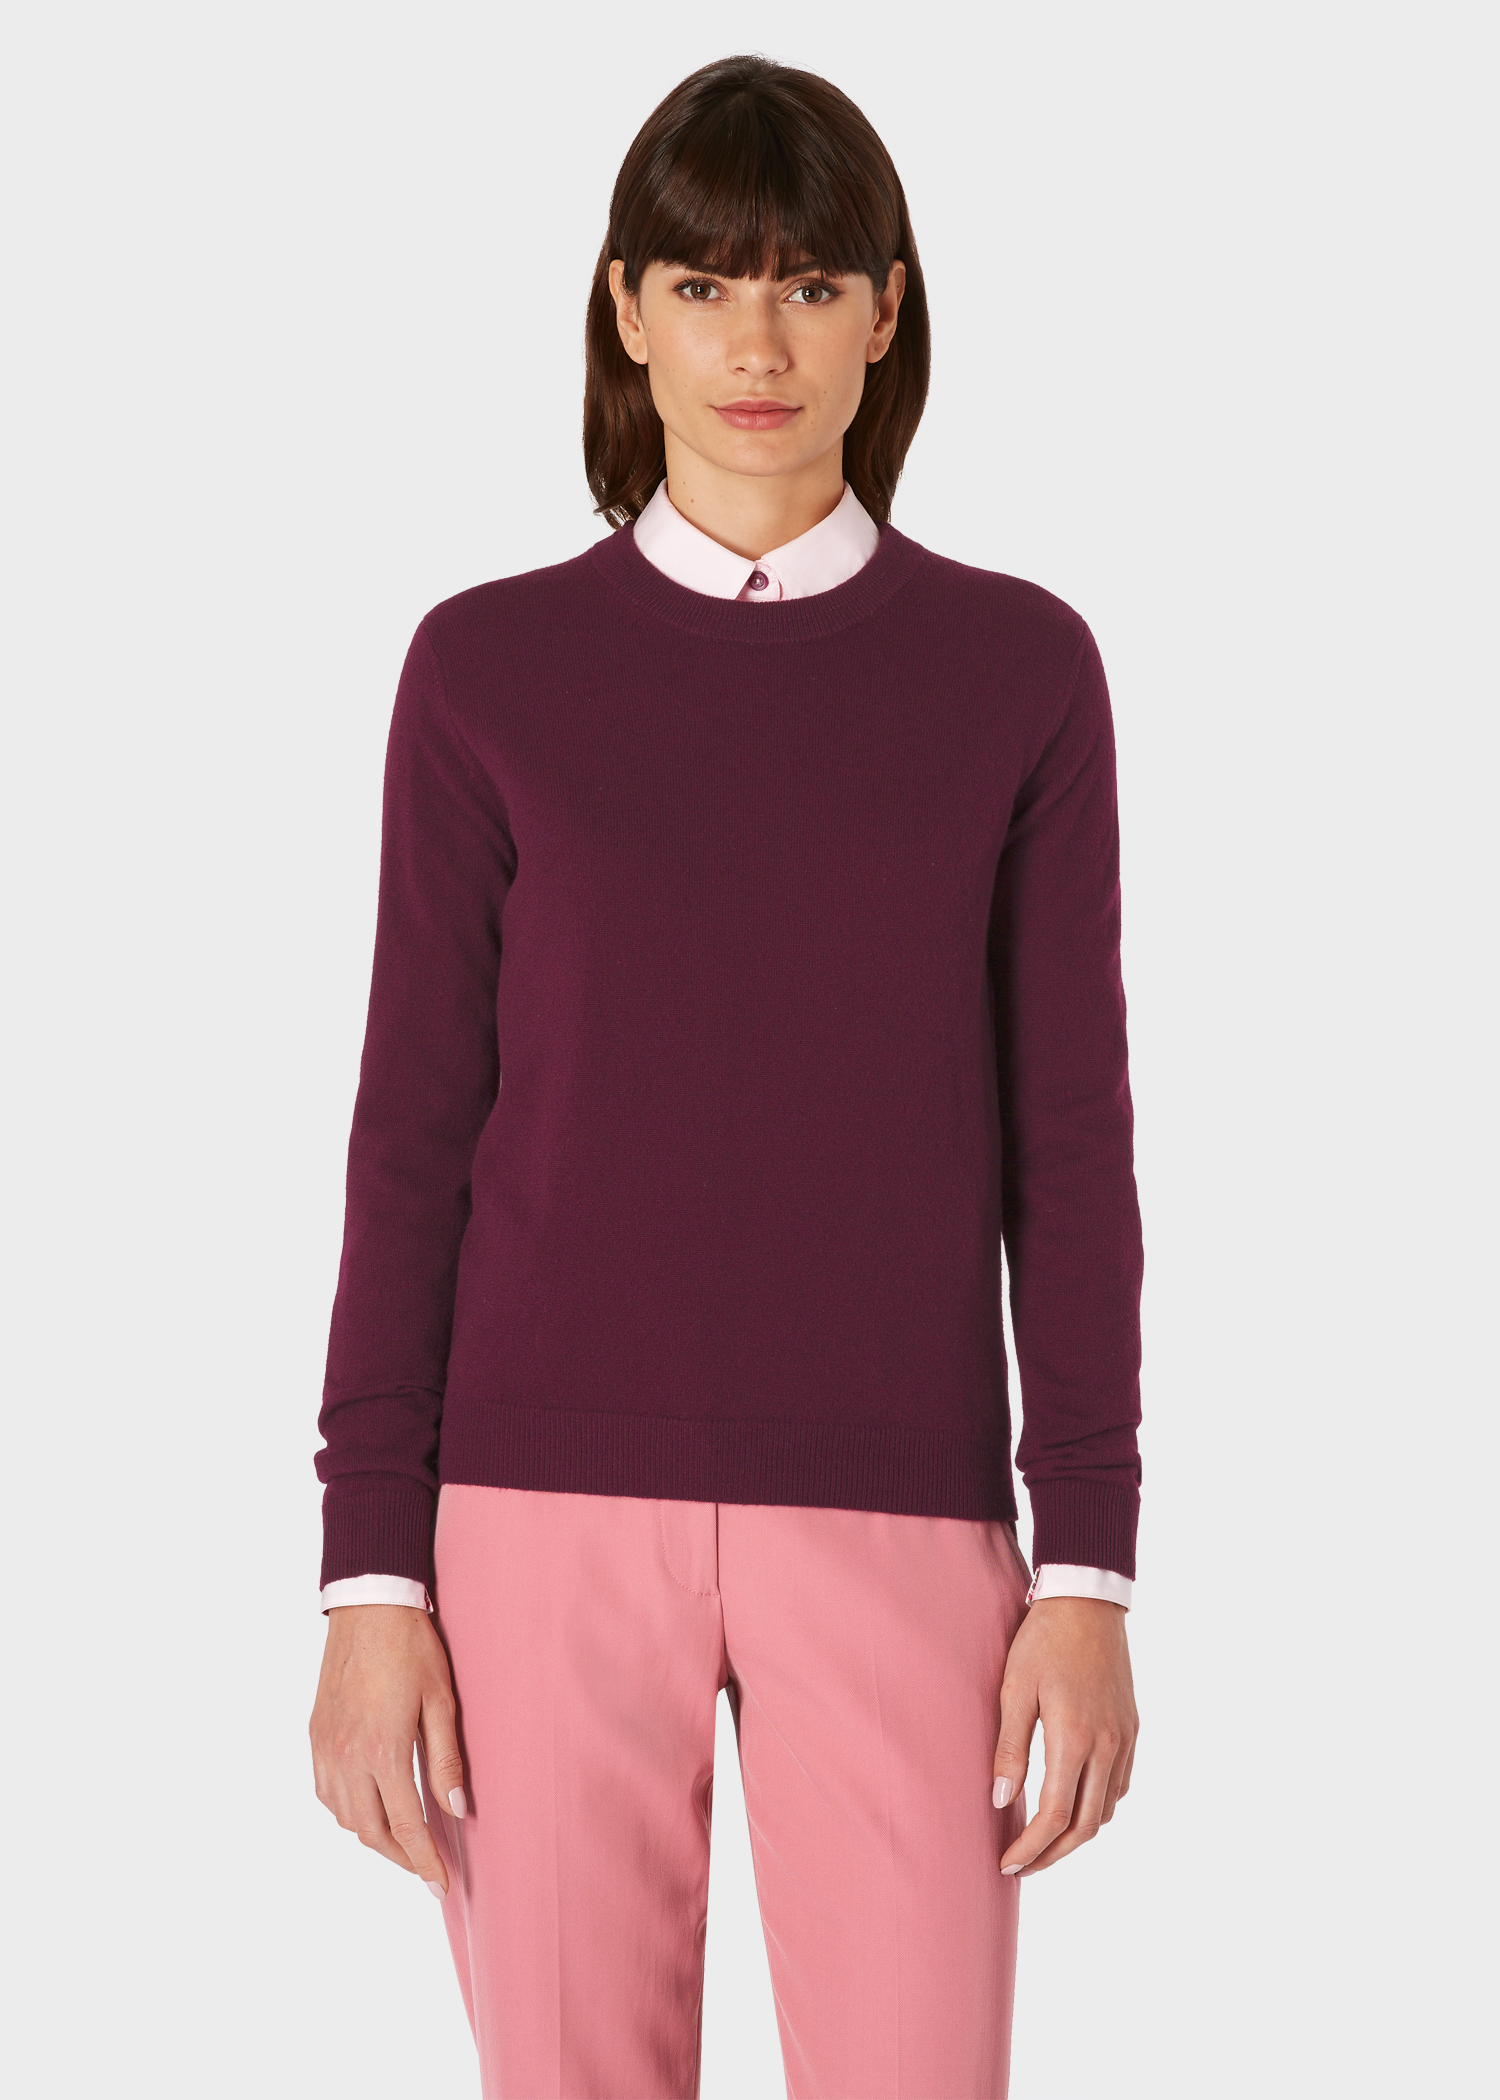 Model front close up - Women's Damson Cashmere Sweater With 'Artist Stripe' Trims Paul Smith